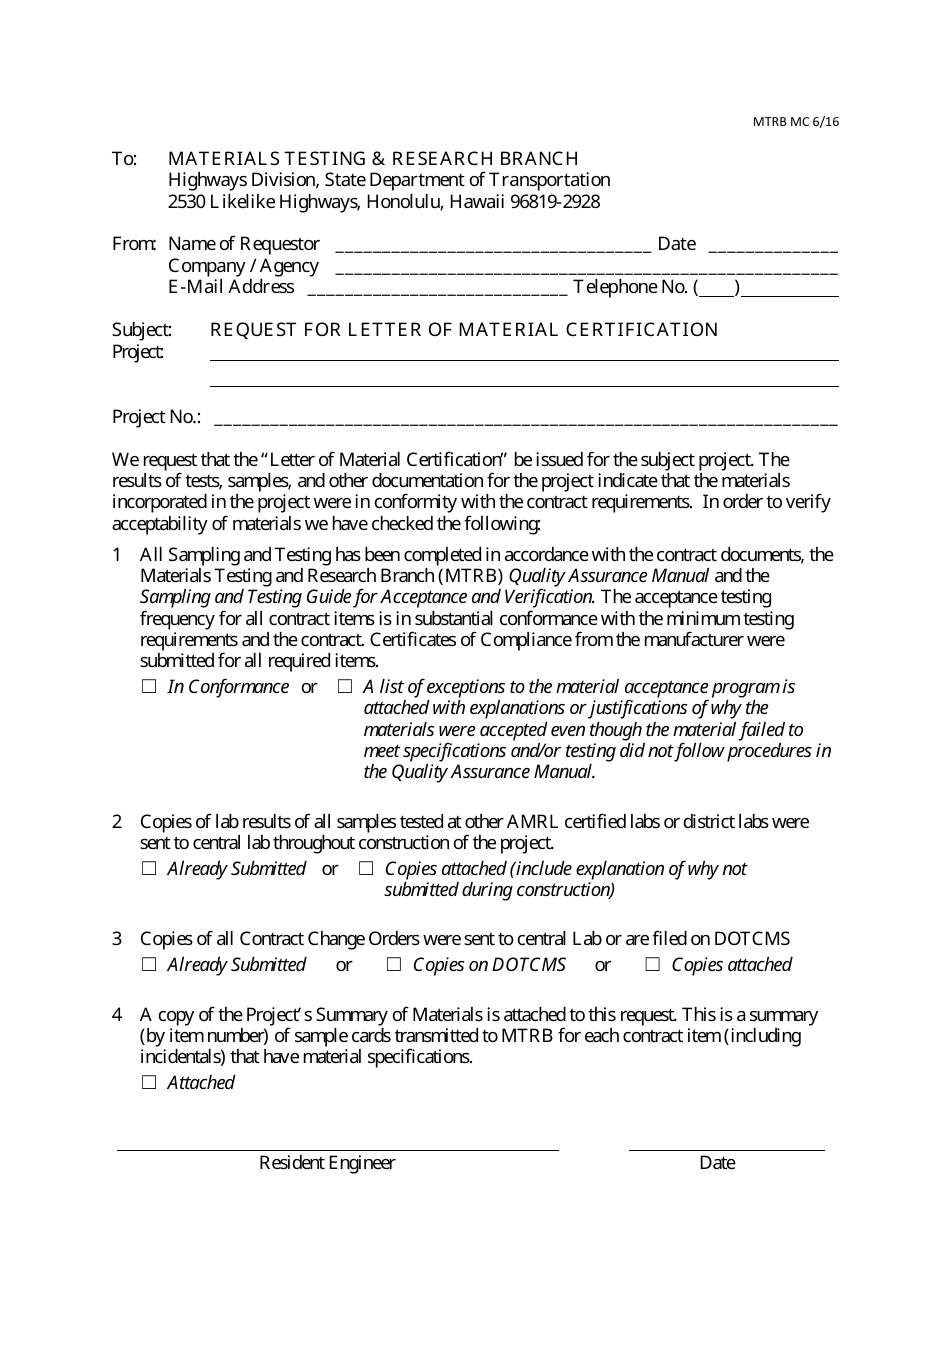 Form MTRB MC Request for Letter of Material Certification - Hawaii, Page 1